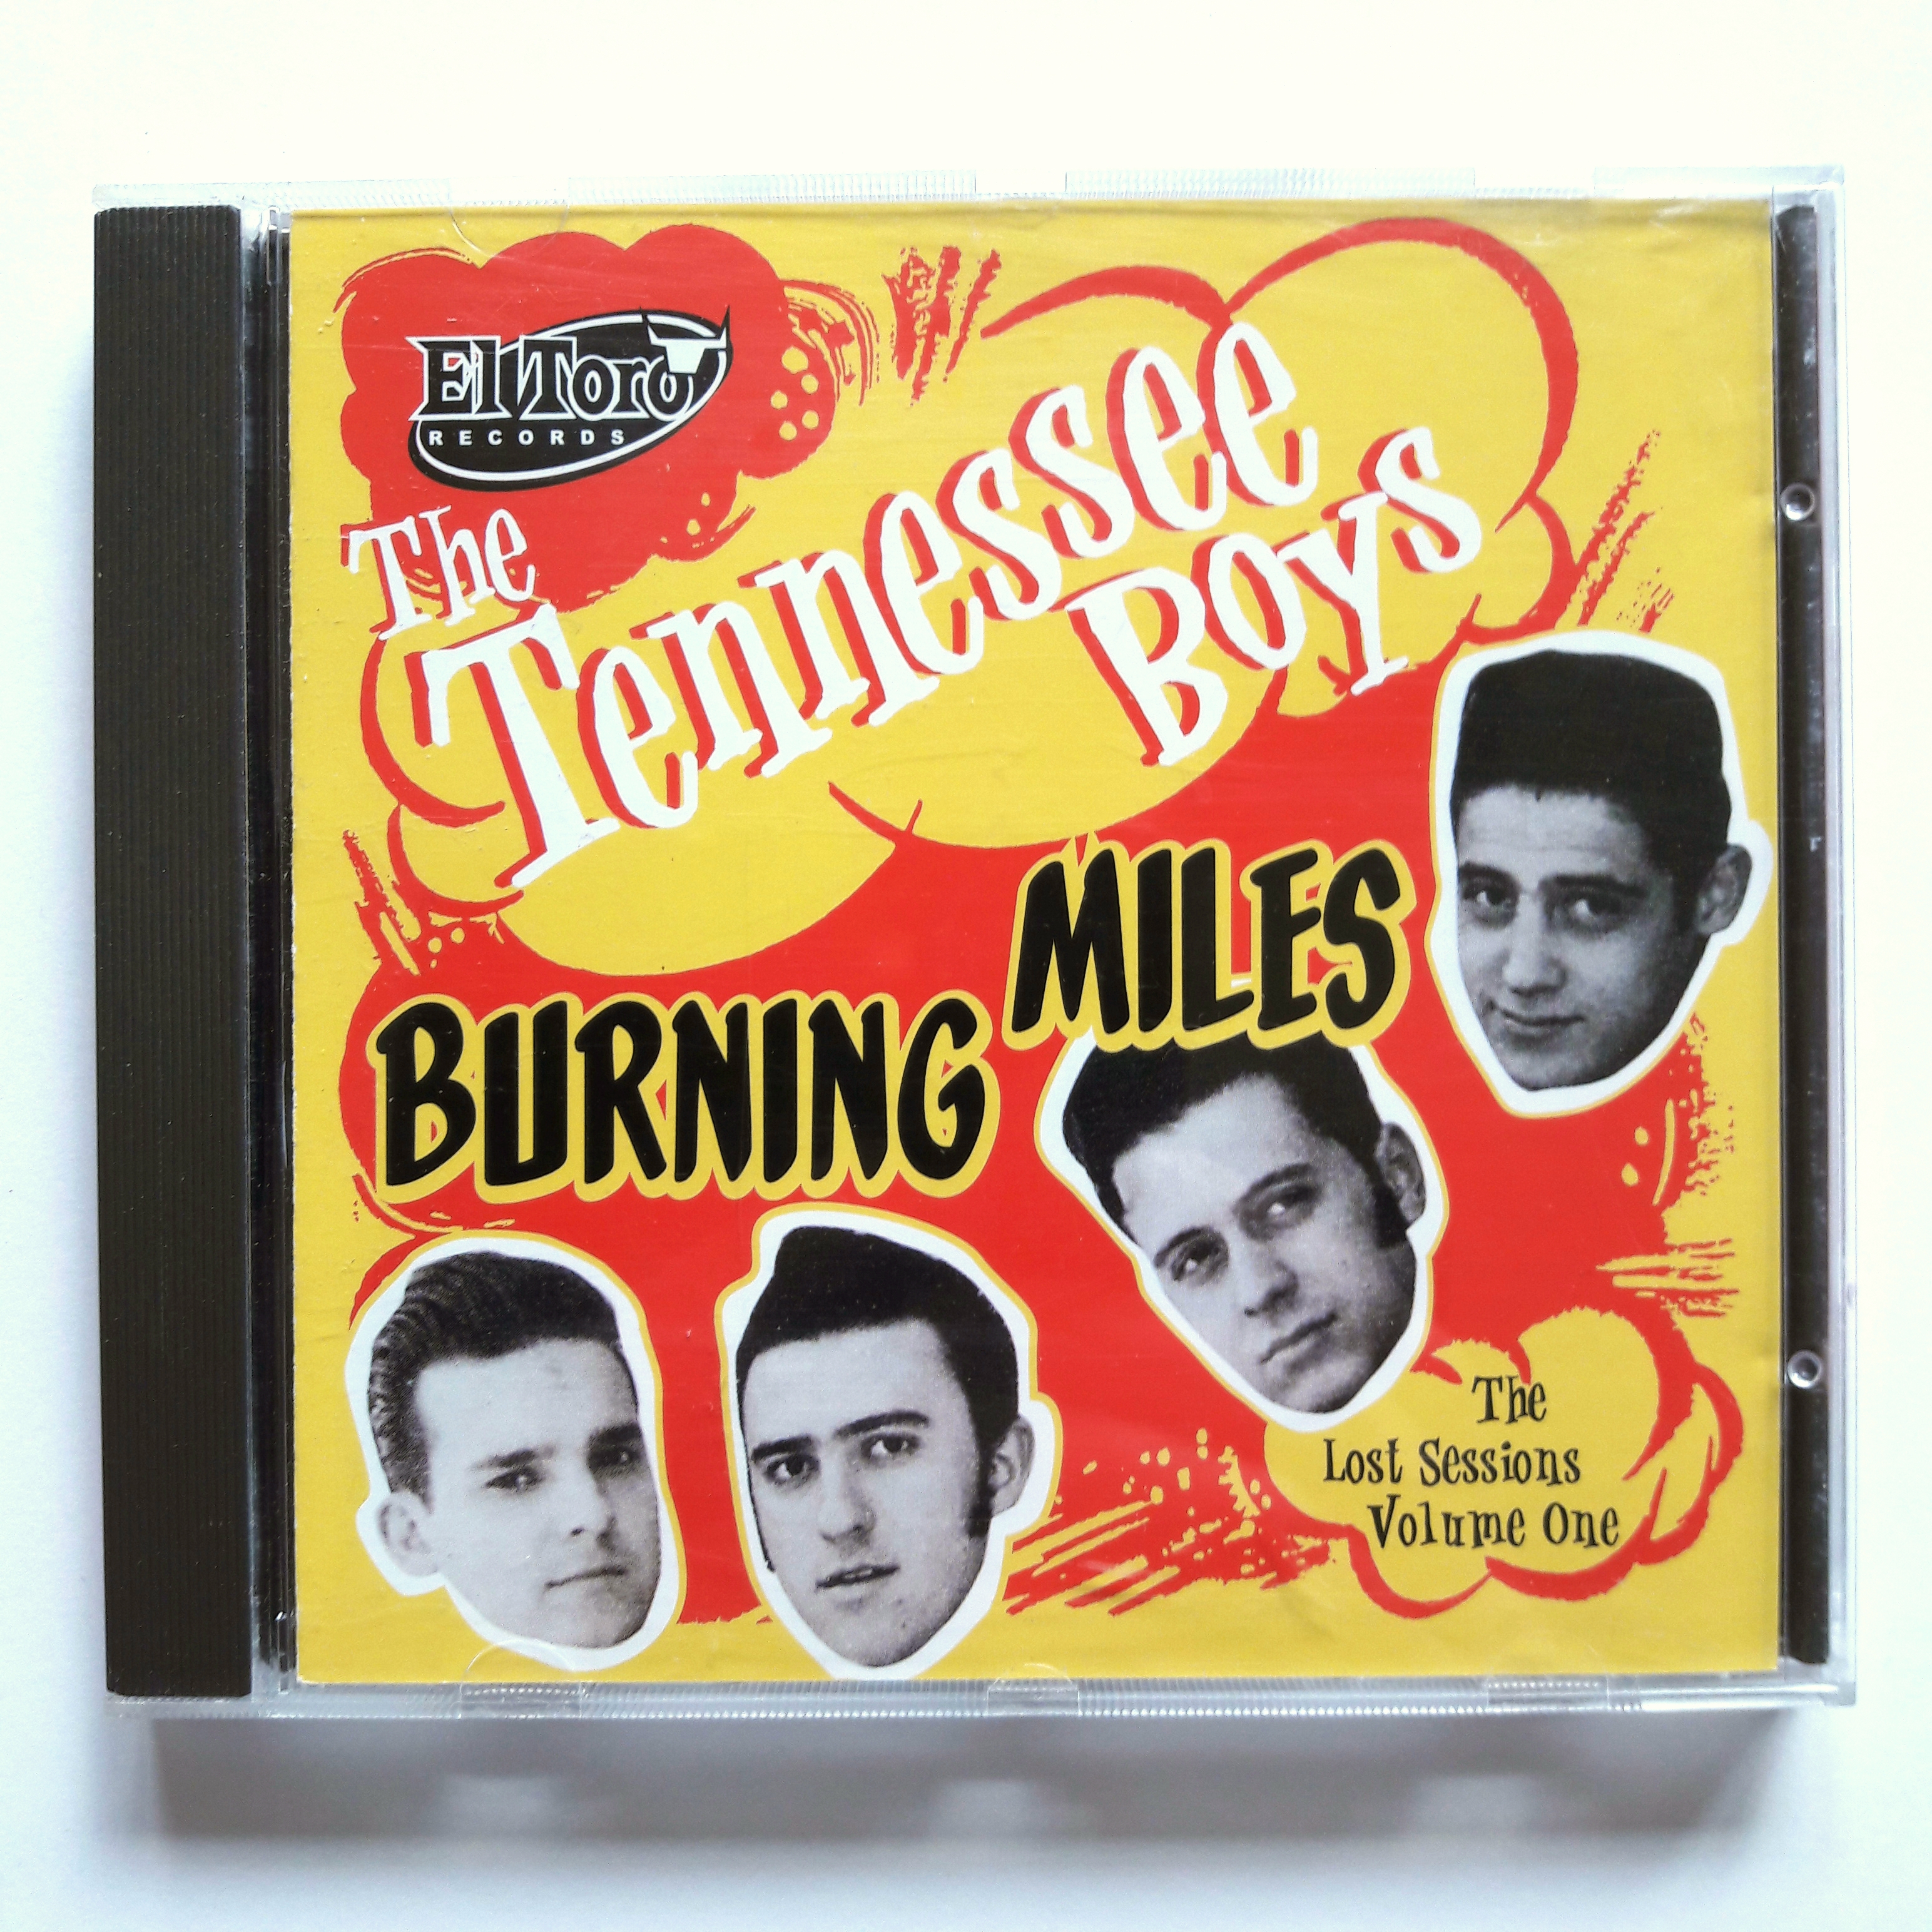 The Tennessee Boys - Burning Miles